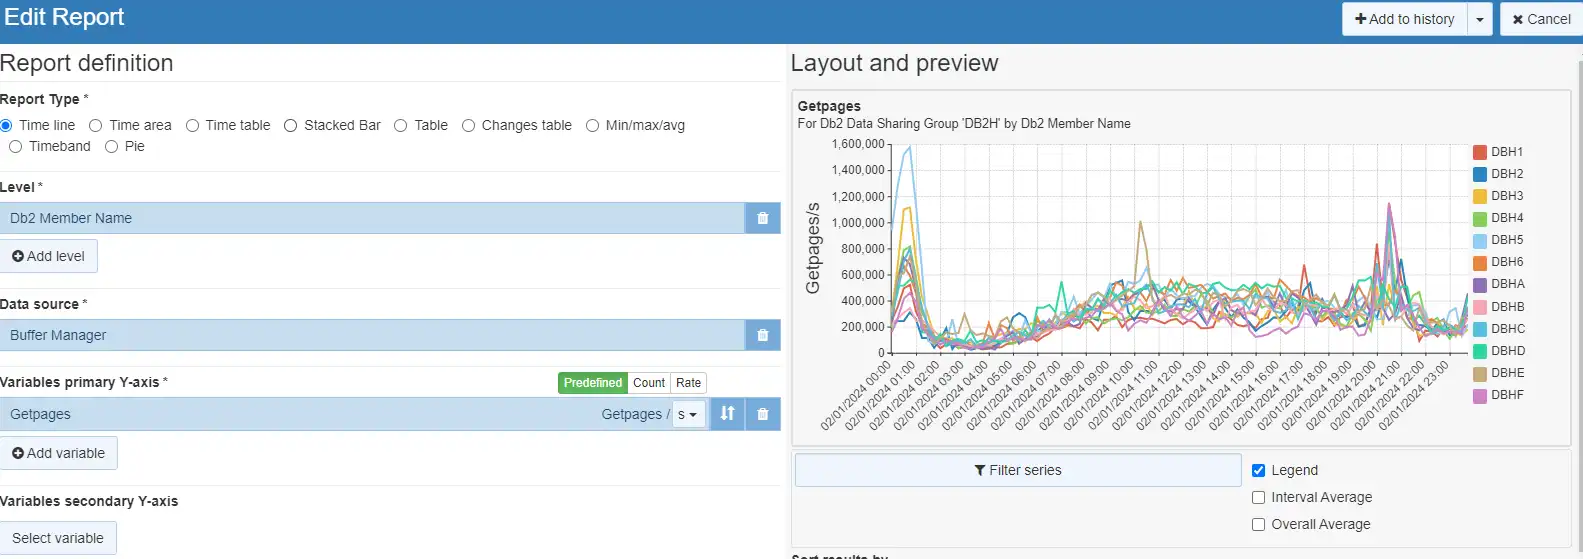 View Db2 Getpages metrics as rates or counts - IntelliMagic Vision